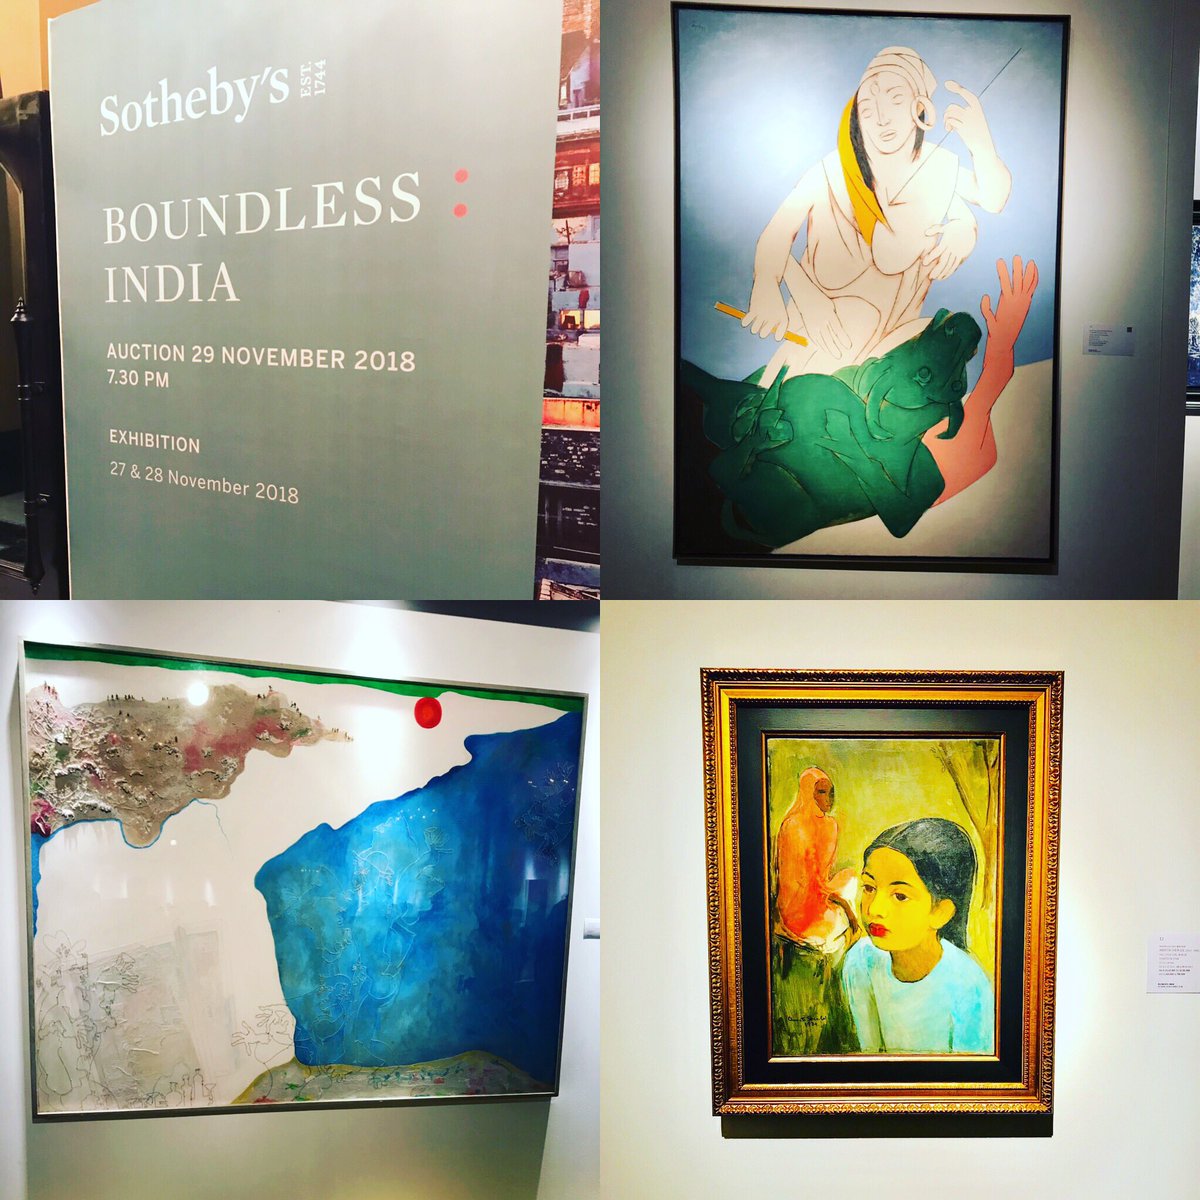 'Boundless: India': Amrita Sher-Gil's artwork fetches over Rs 18 crore